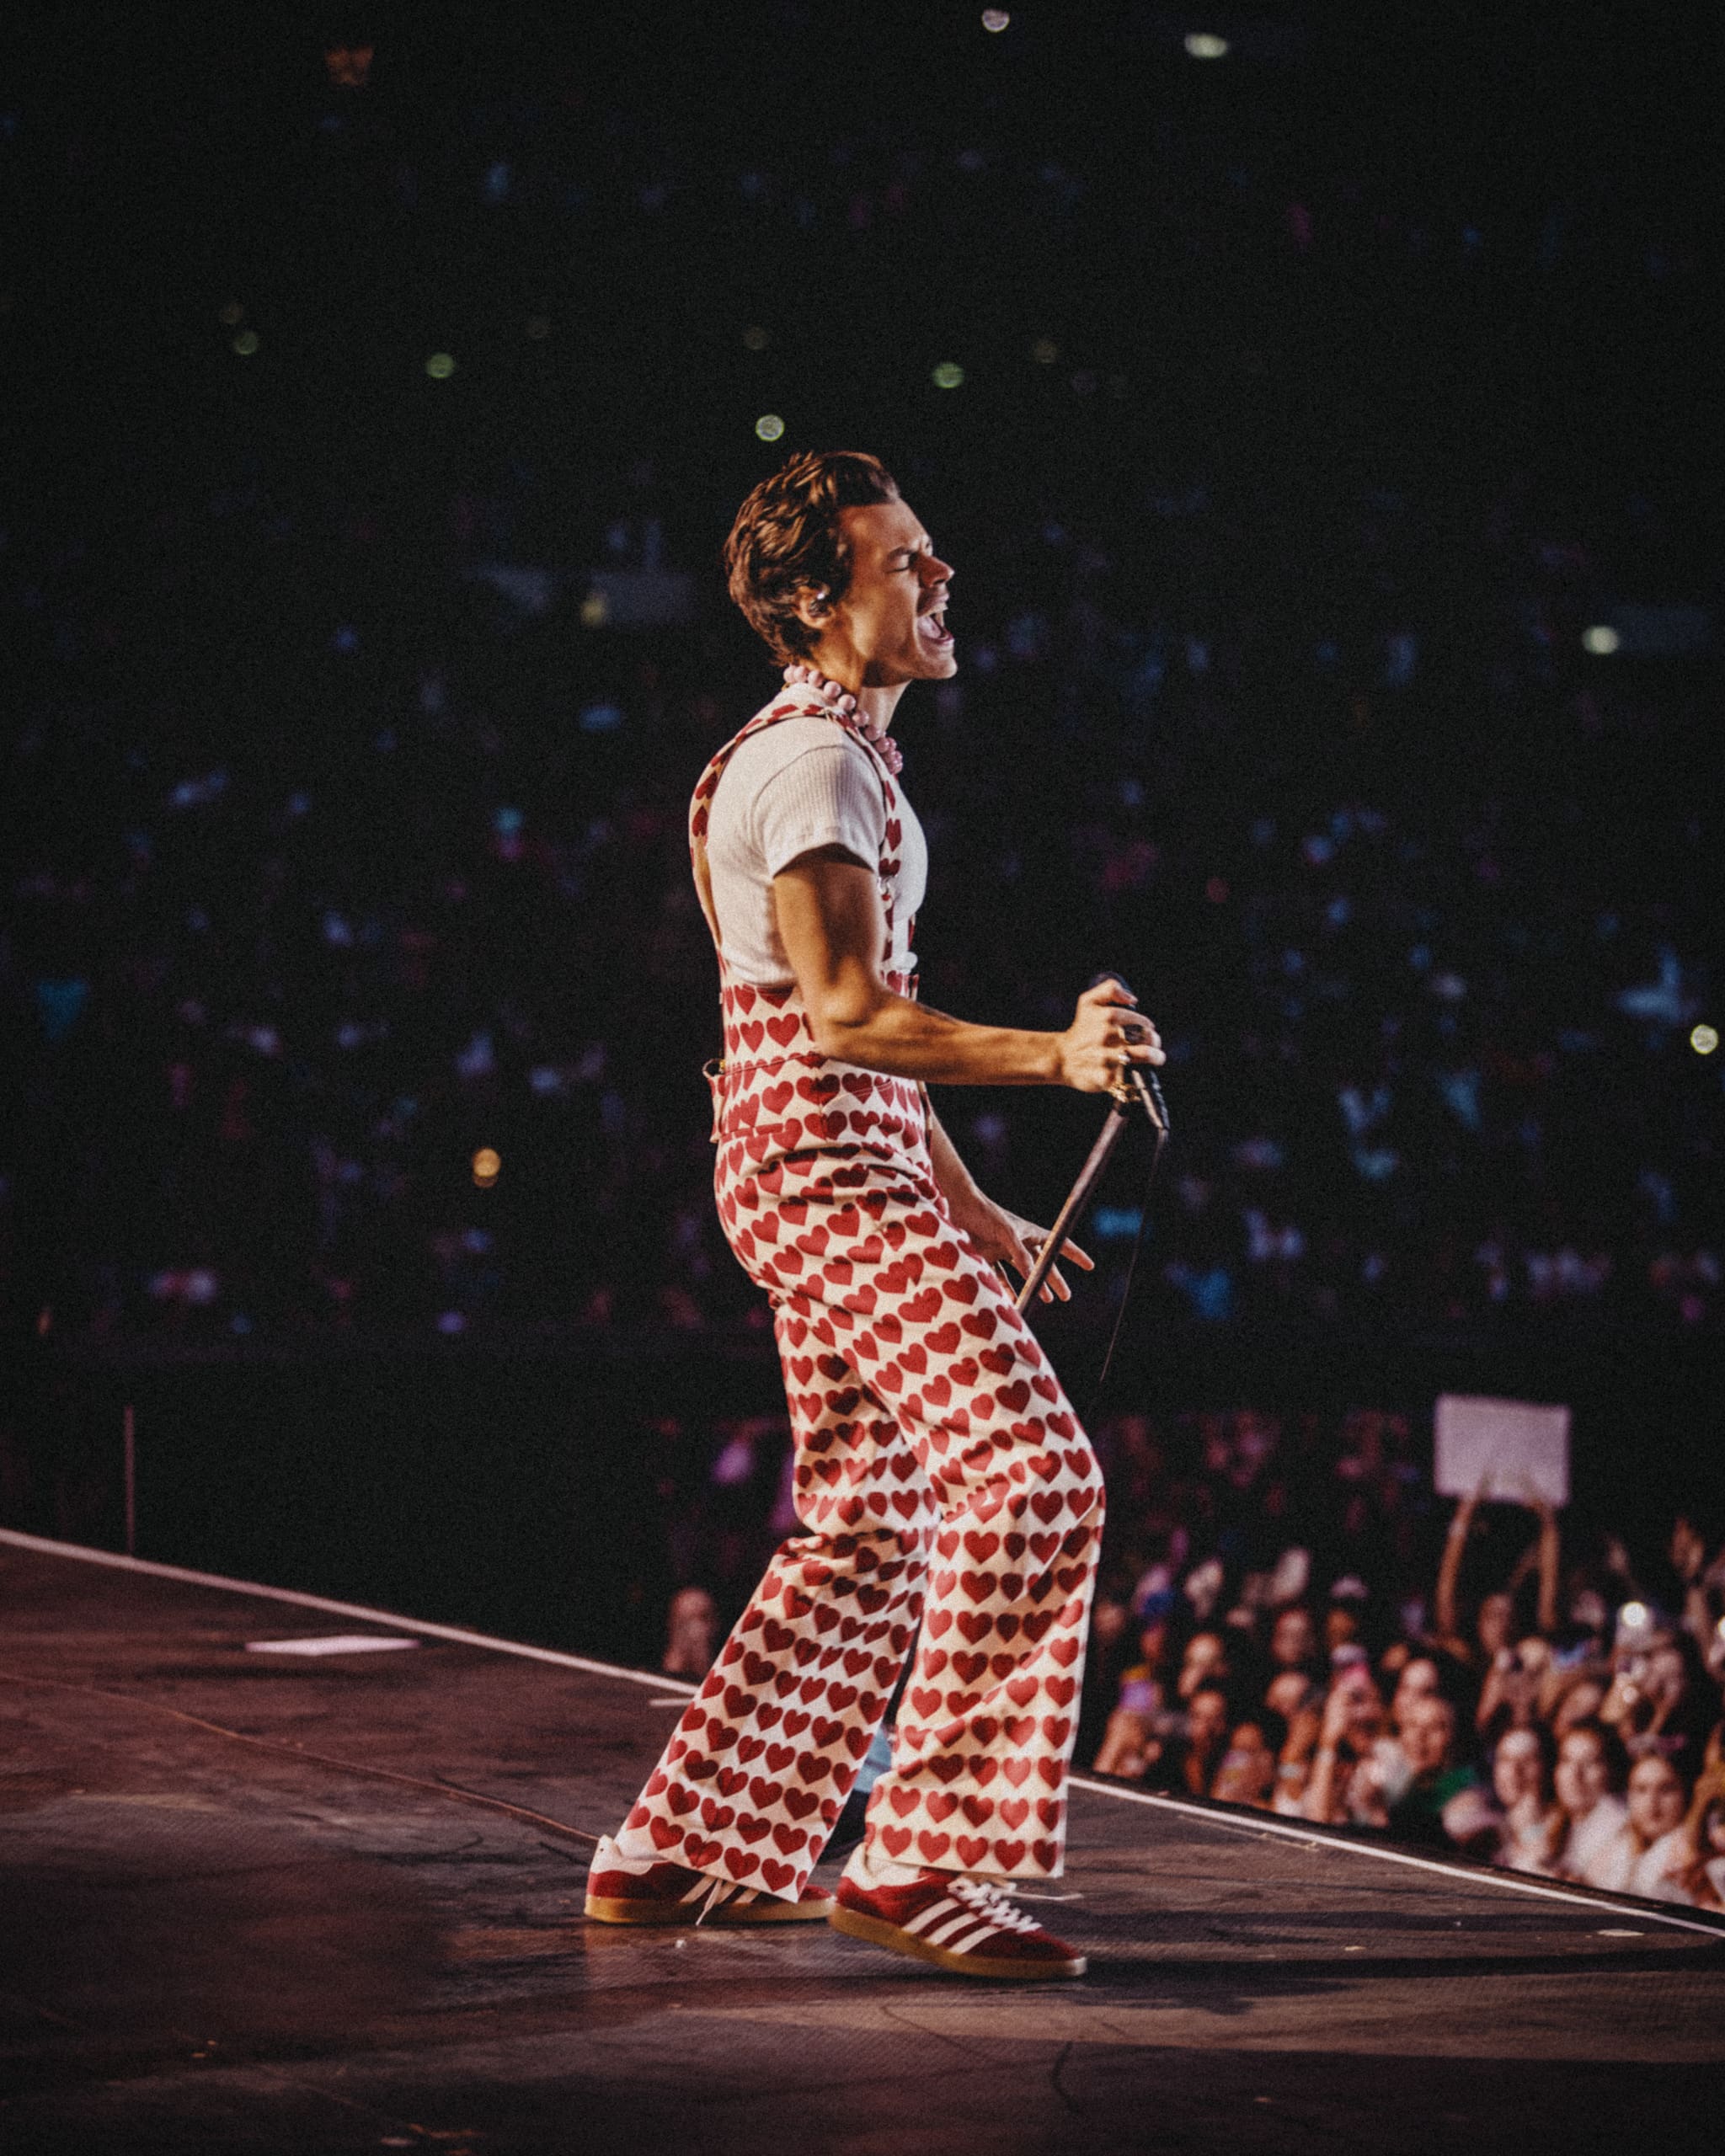 Harry Styles Love On Tour. Wembley.